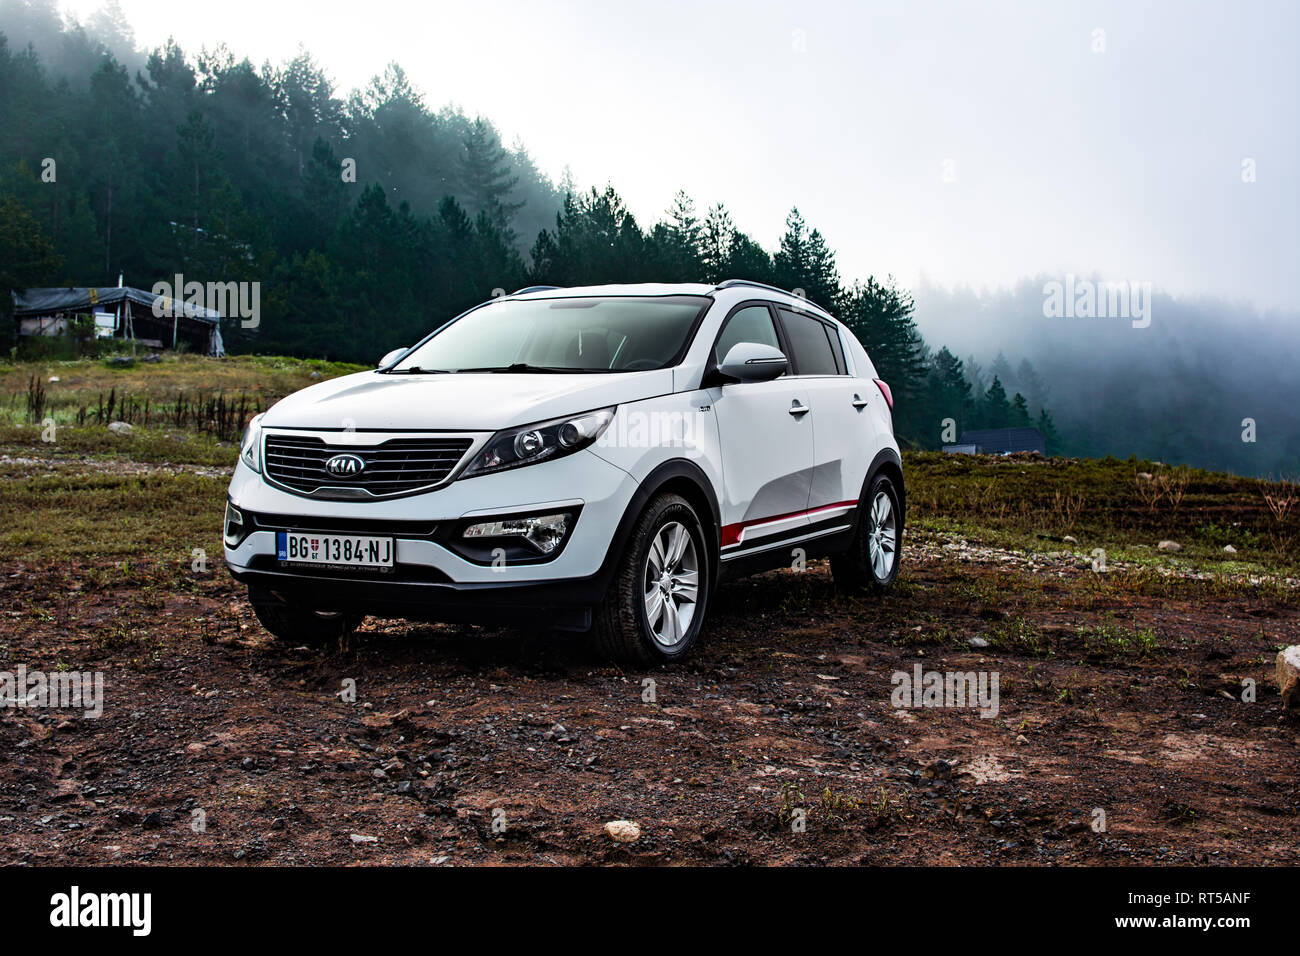 Kia Sportage 2.0 CRDI awd or 4x4, parked in a mudy coast of a lake Zaovine on Mount Tara. With a beautiful forest, and water vapor in the backgorund. Stock Photo